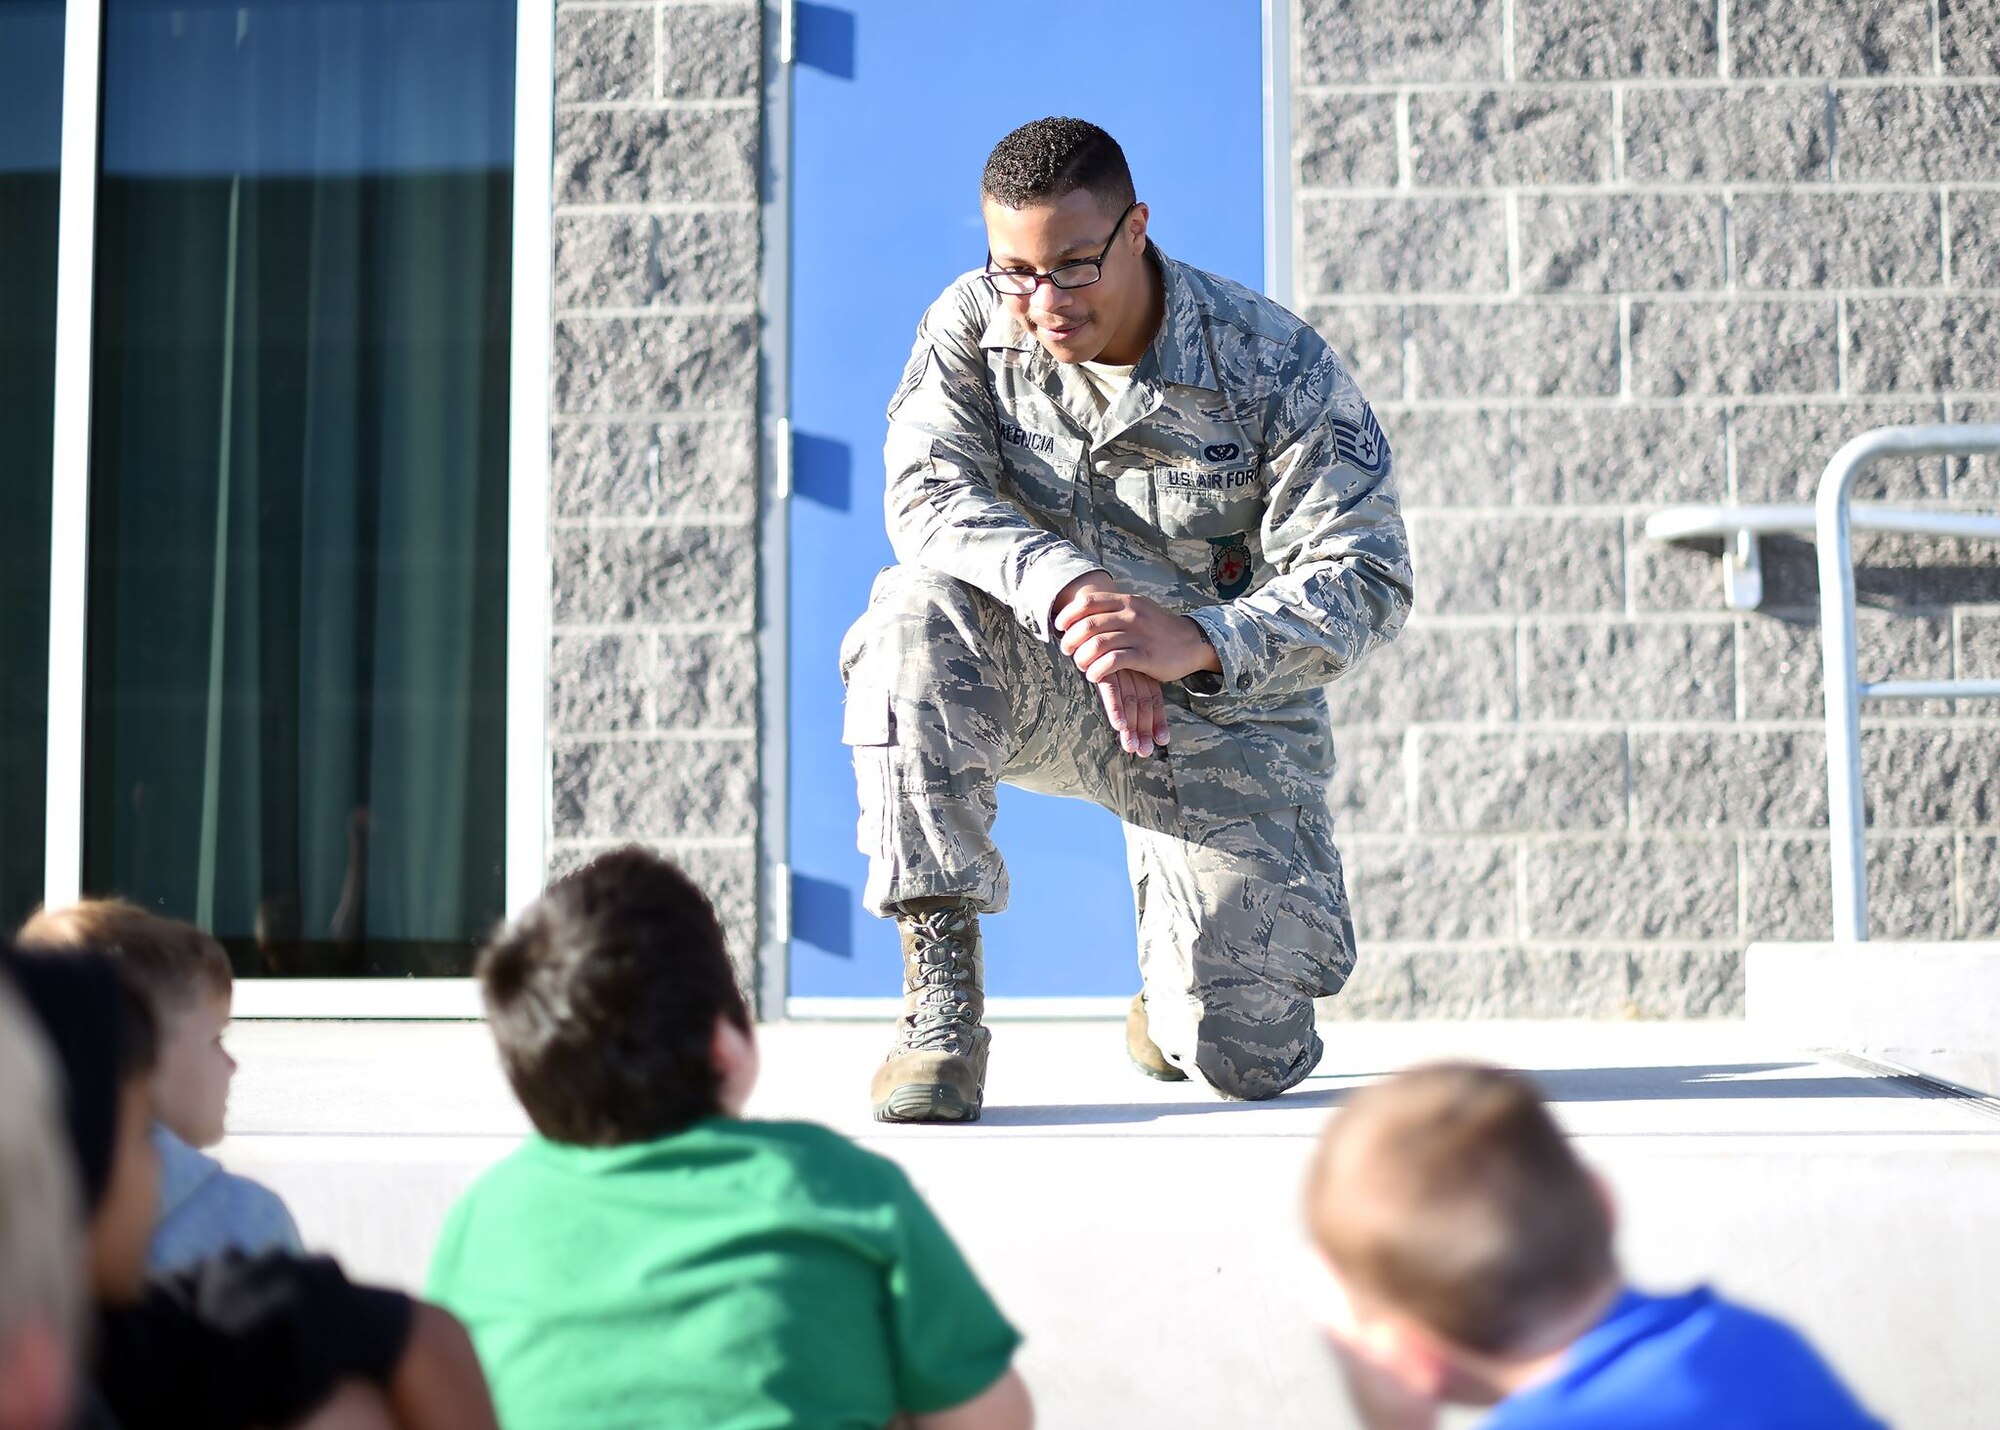 A uniformed member of the Air Force bends down on on knee to speak with grade-school aged children. It's sunny. The children listen to the Airman attentively.